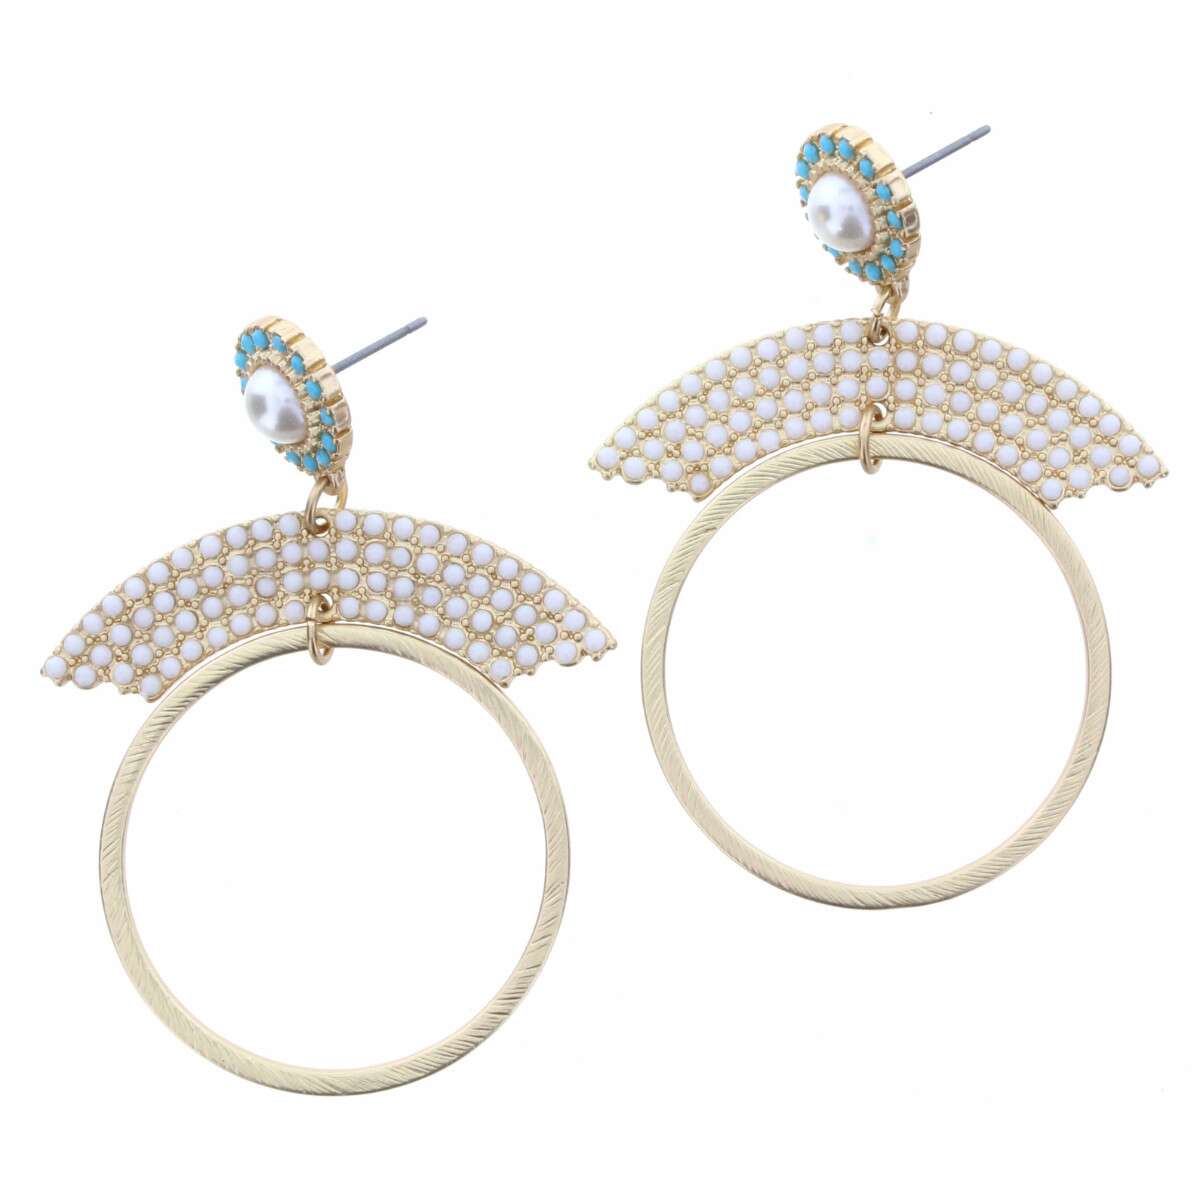 Light Blue Crystals with Center Pearl, White Crystal Curve with Gold Hoop Earring